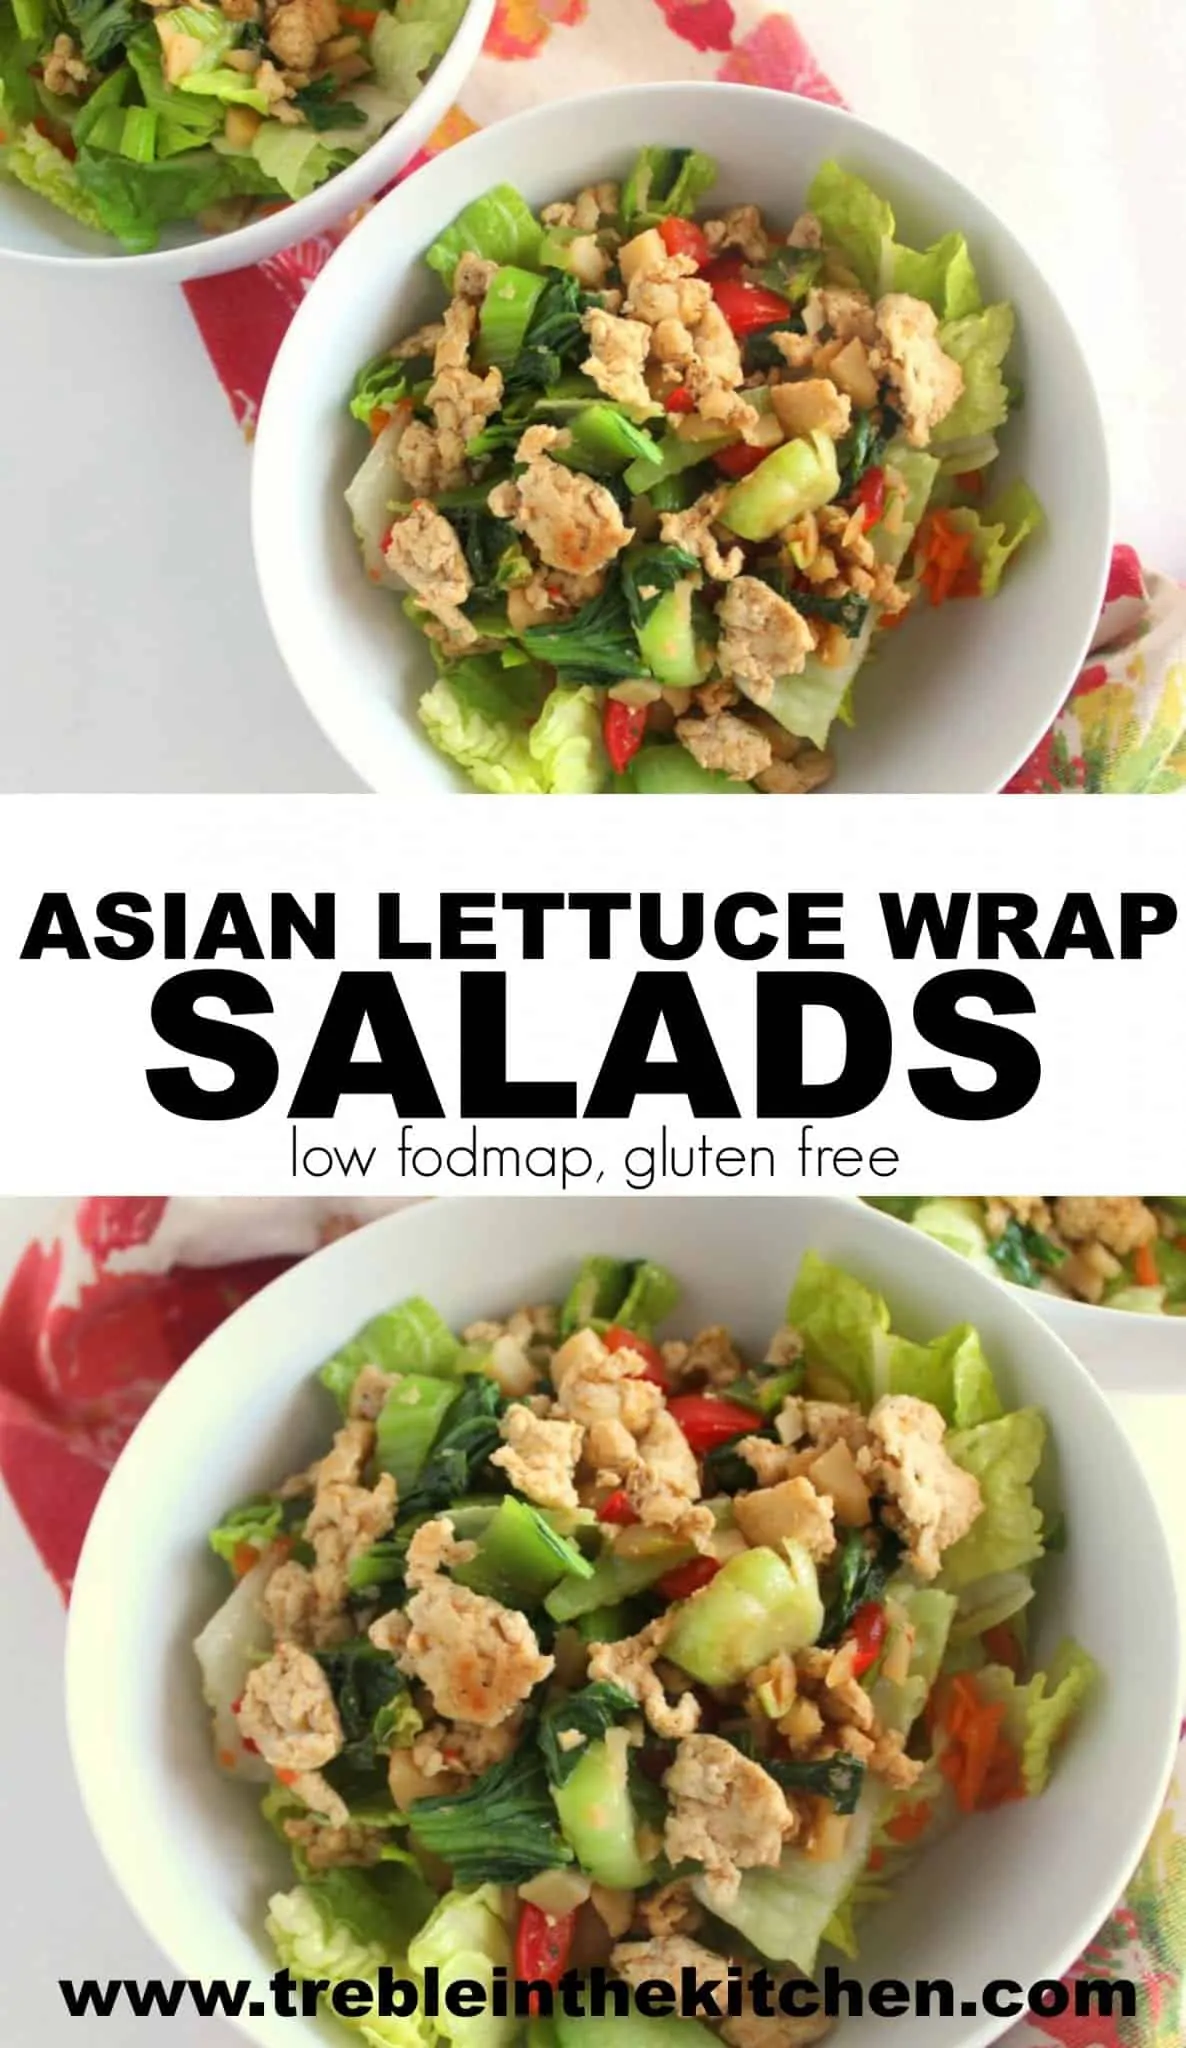 Asian Lettuce Wrap Salad from Treble in the Kitchen